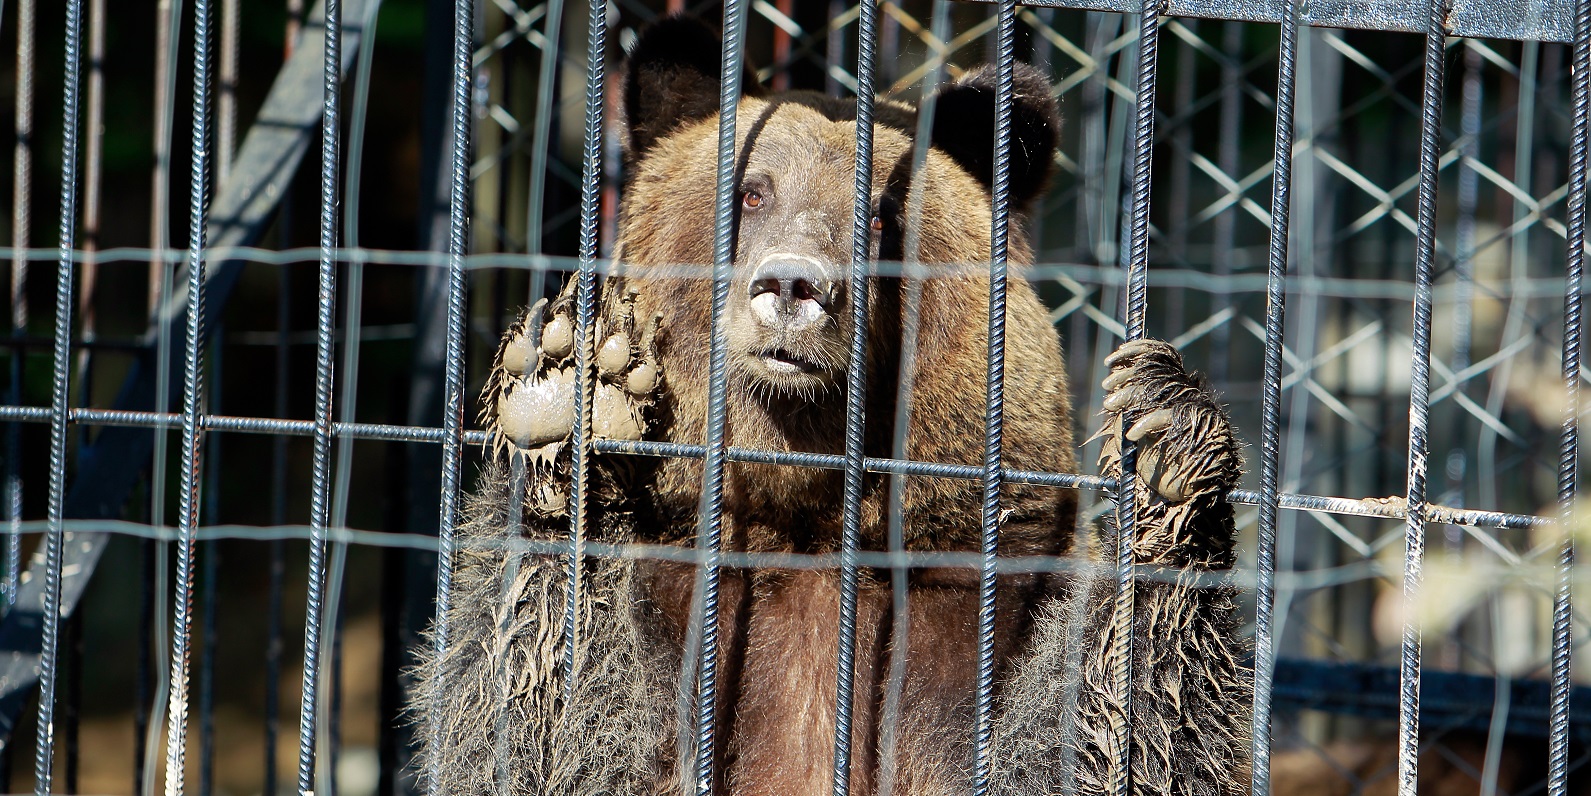 bears kept in cages cannot pursue their natural needs